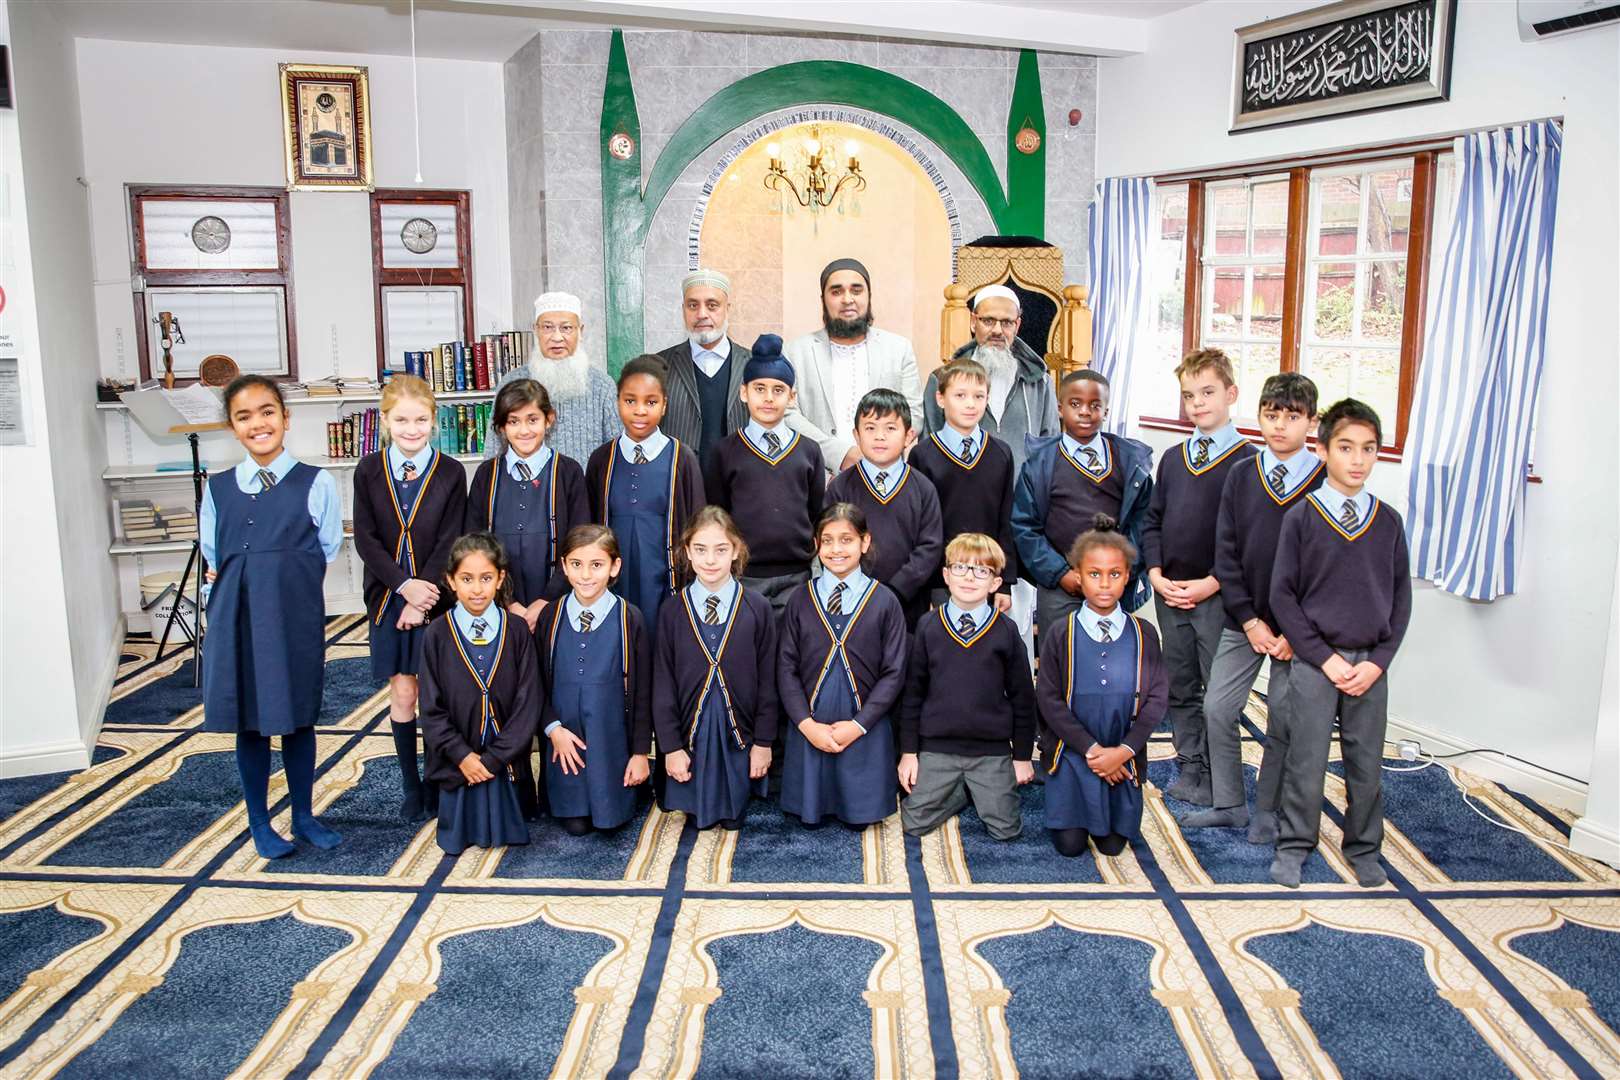 Pupils from the Bronte School visit Gravesham Muslim Cultural and Education Centre